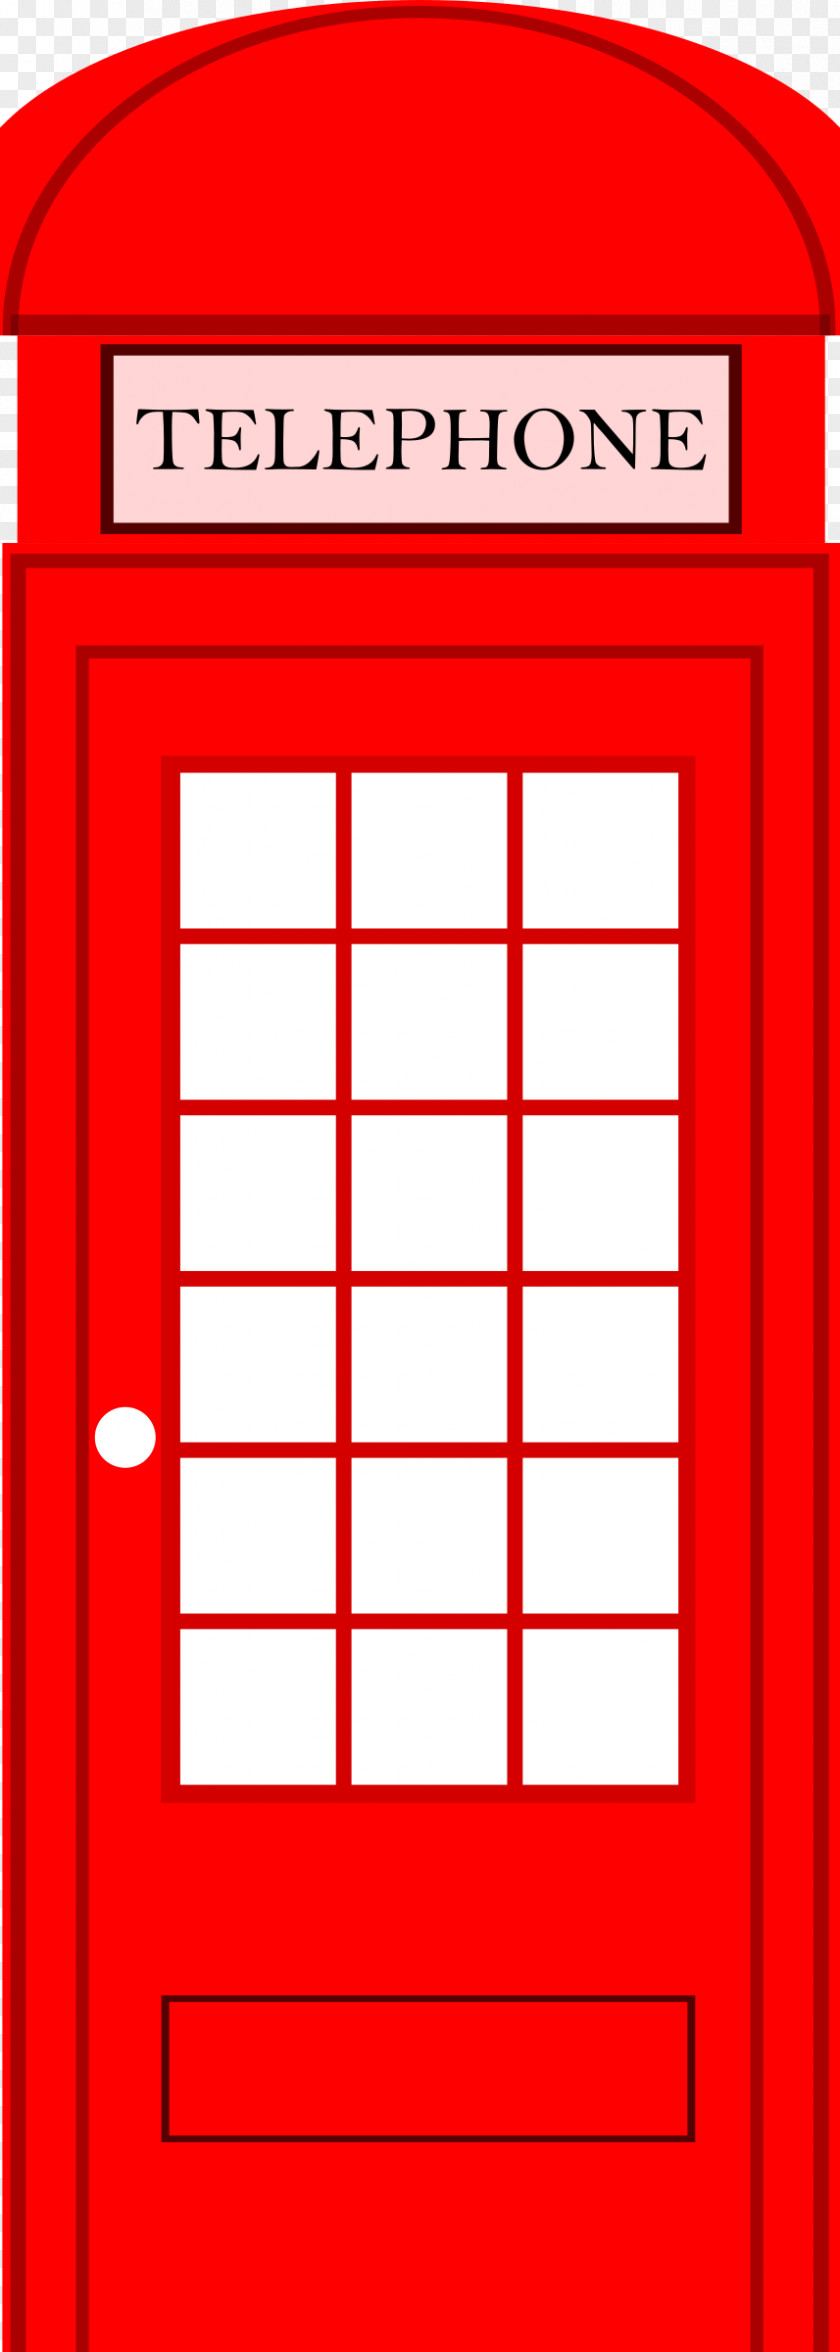 Cartoon London Cliparts Telephone Booth Red Box Clip Art PNG